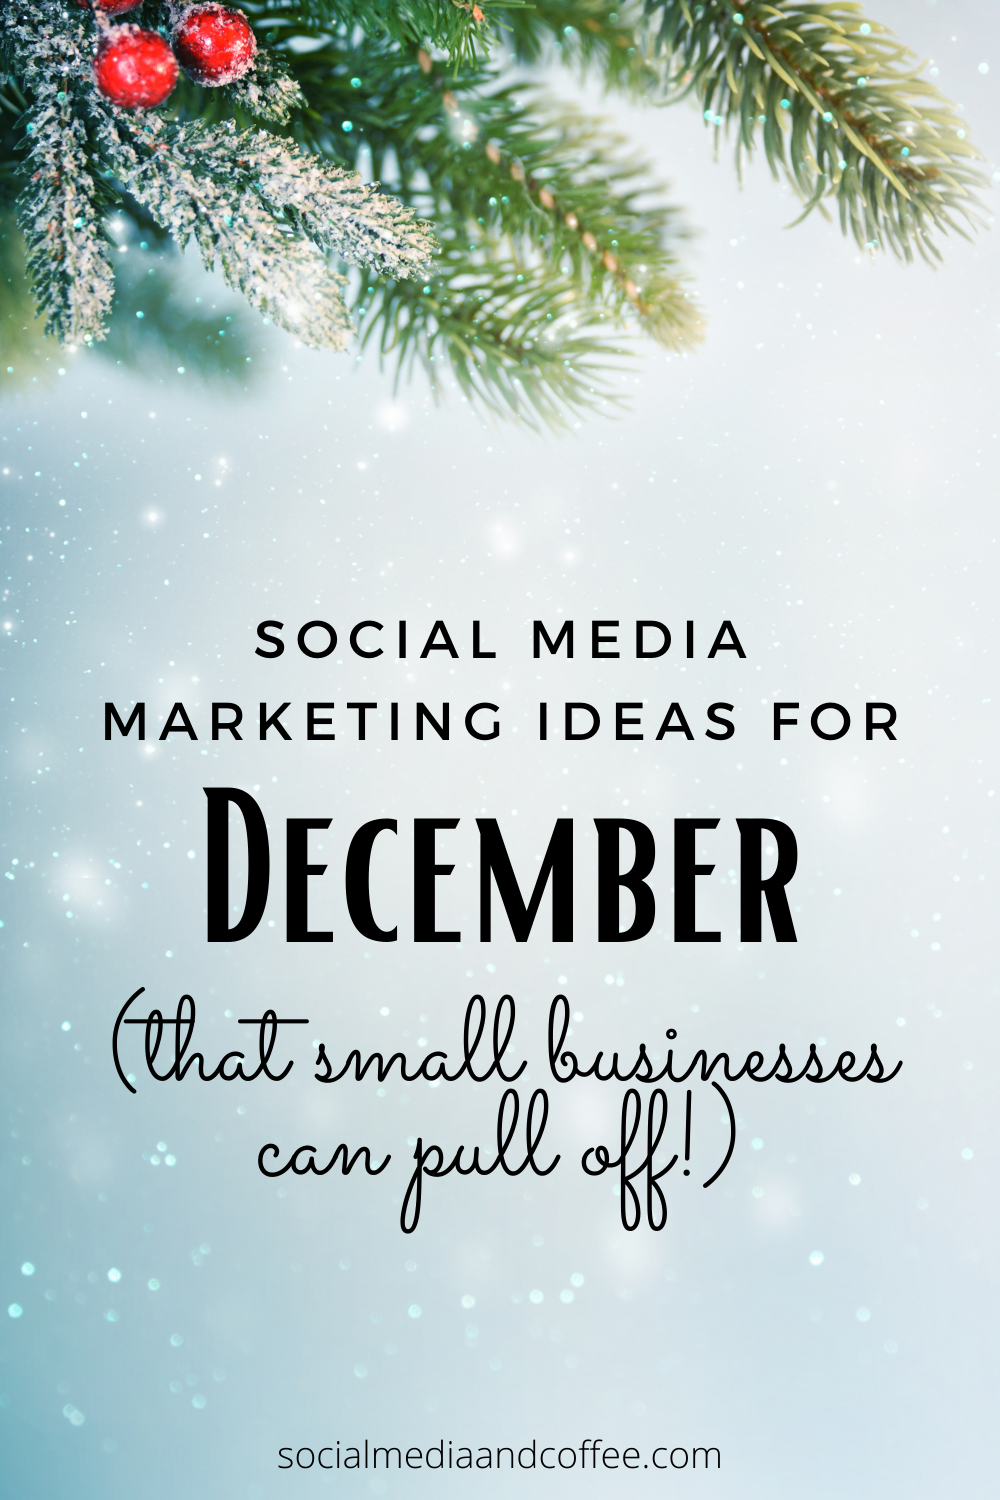 Marketing ideas for December - for small businesses & blogs -   18 small business saturday marketing holidays ideas